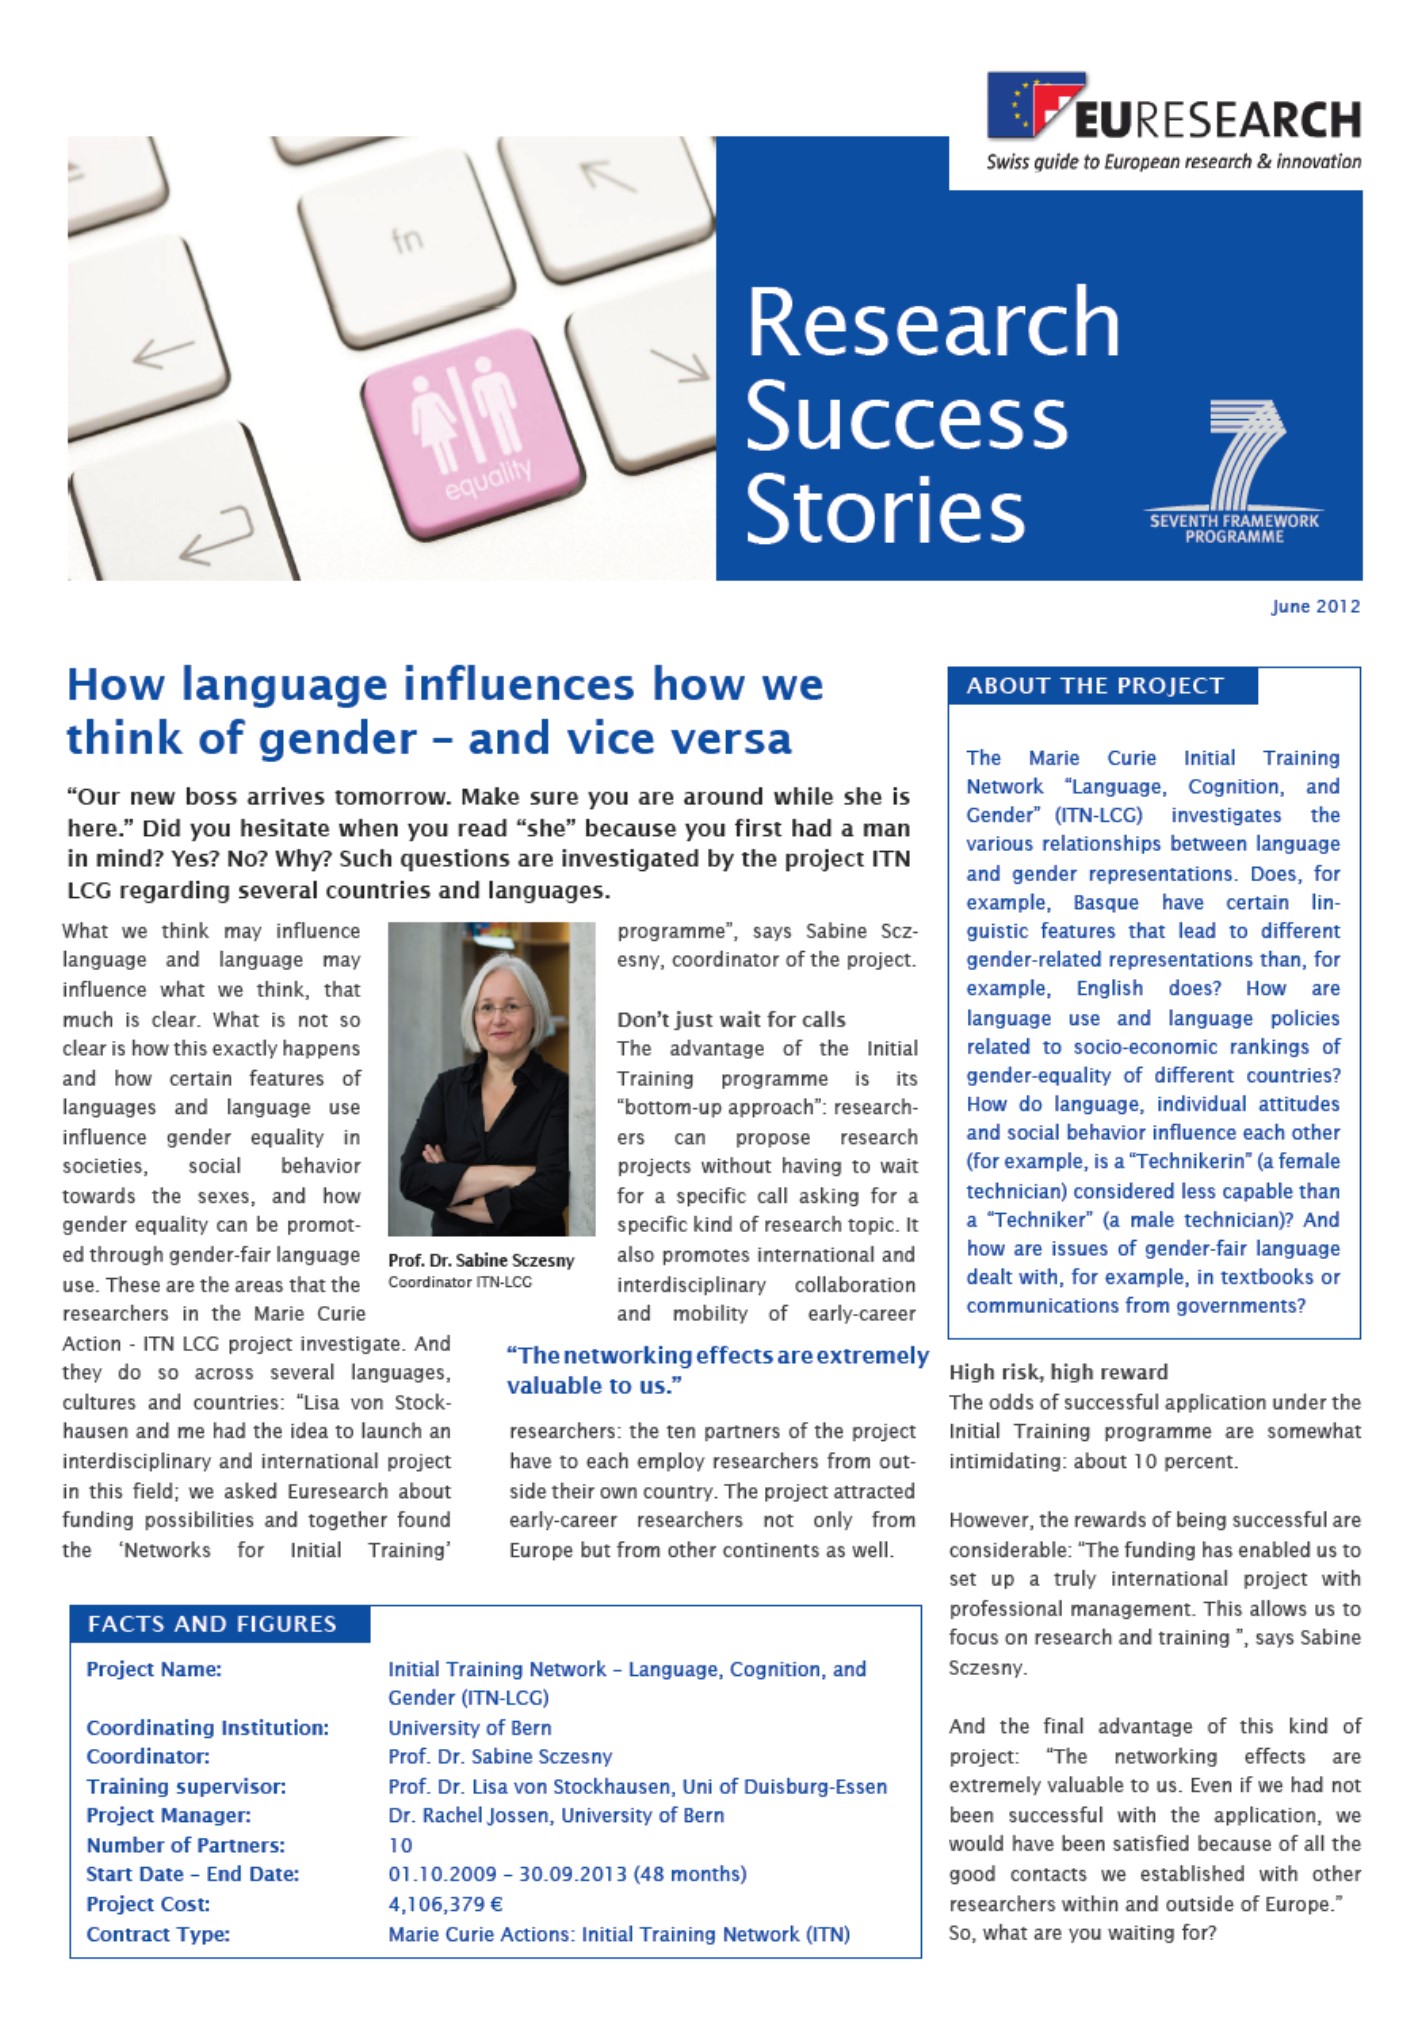 The graphic shows an excerpt of a newspaper article, which is about the gender research of Prof. Sabine Sczesny and her team.